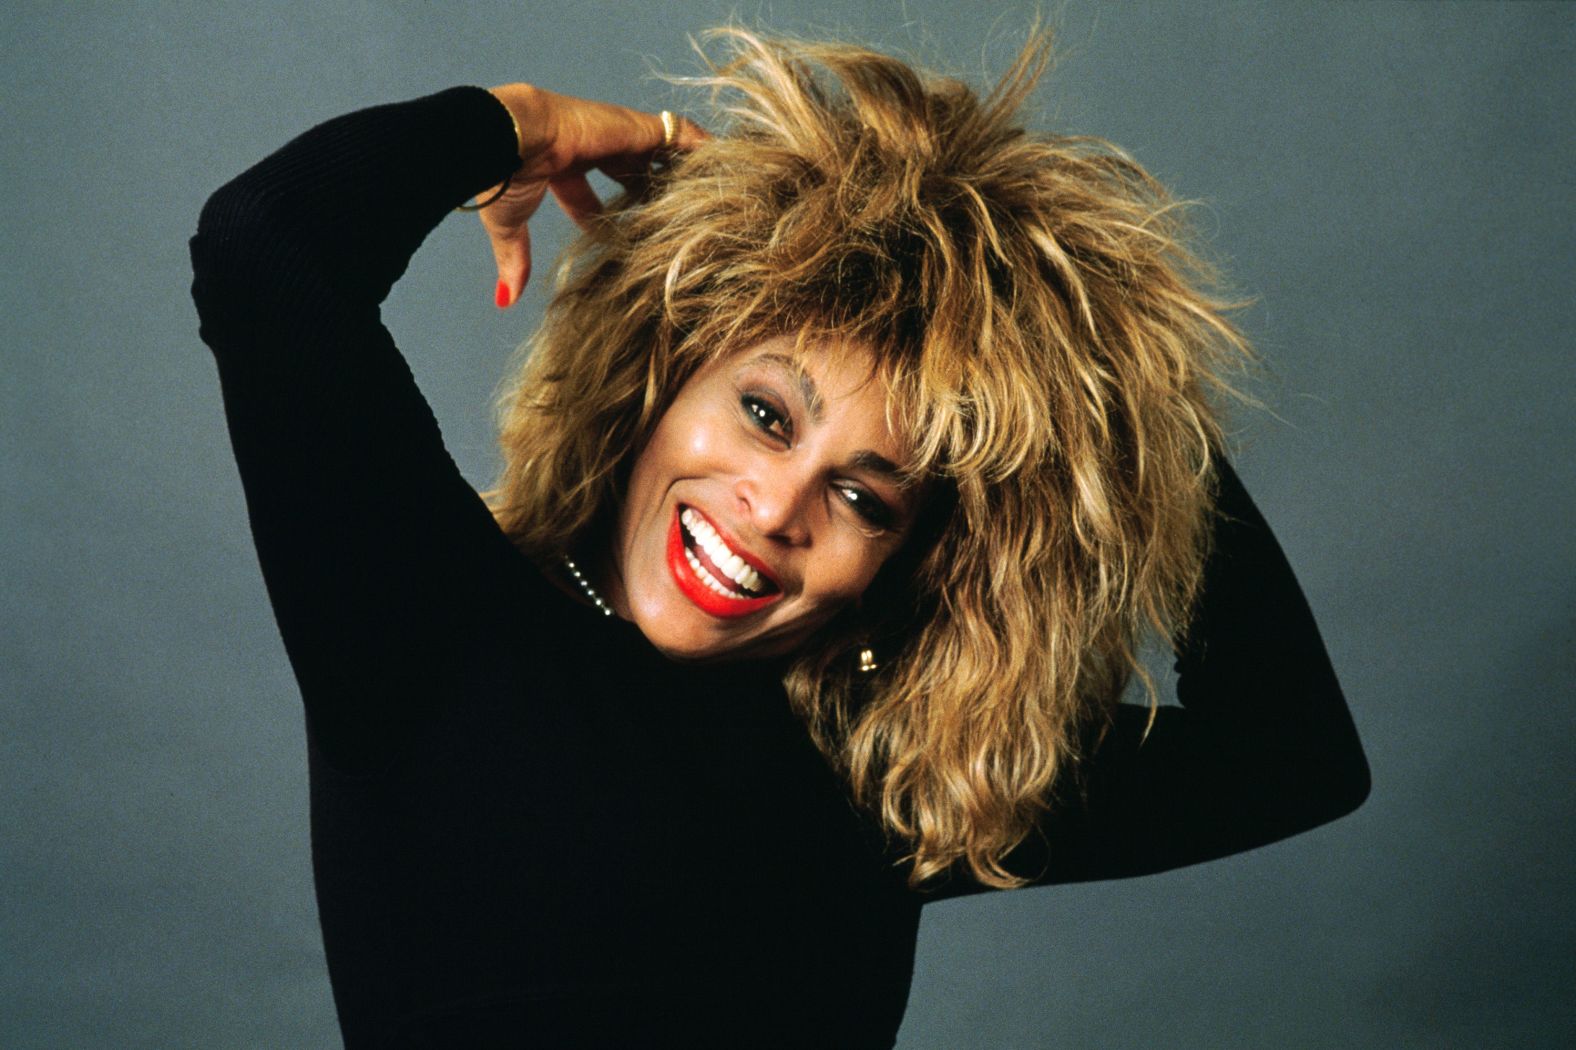 Turner poses for a portrait in 1985.